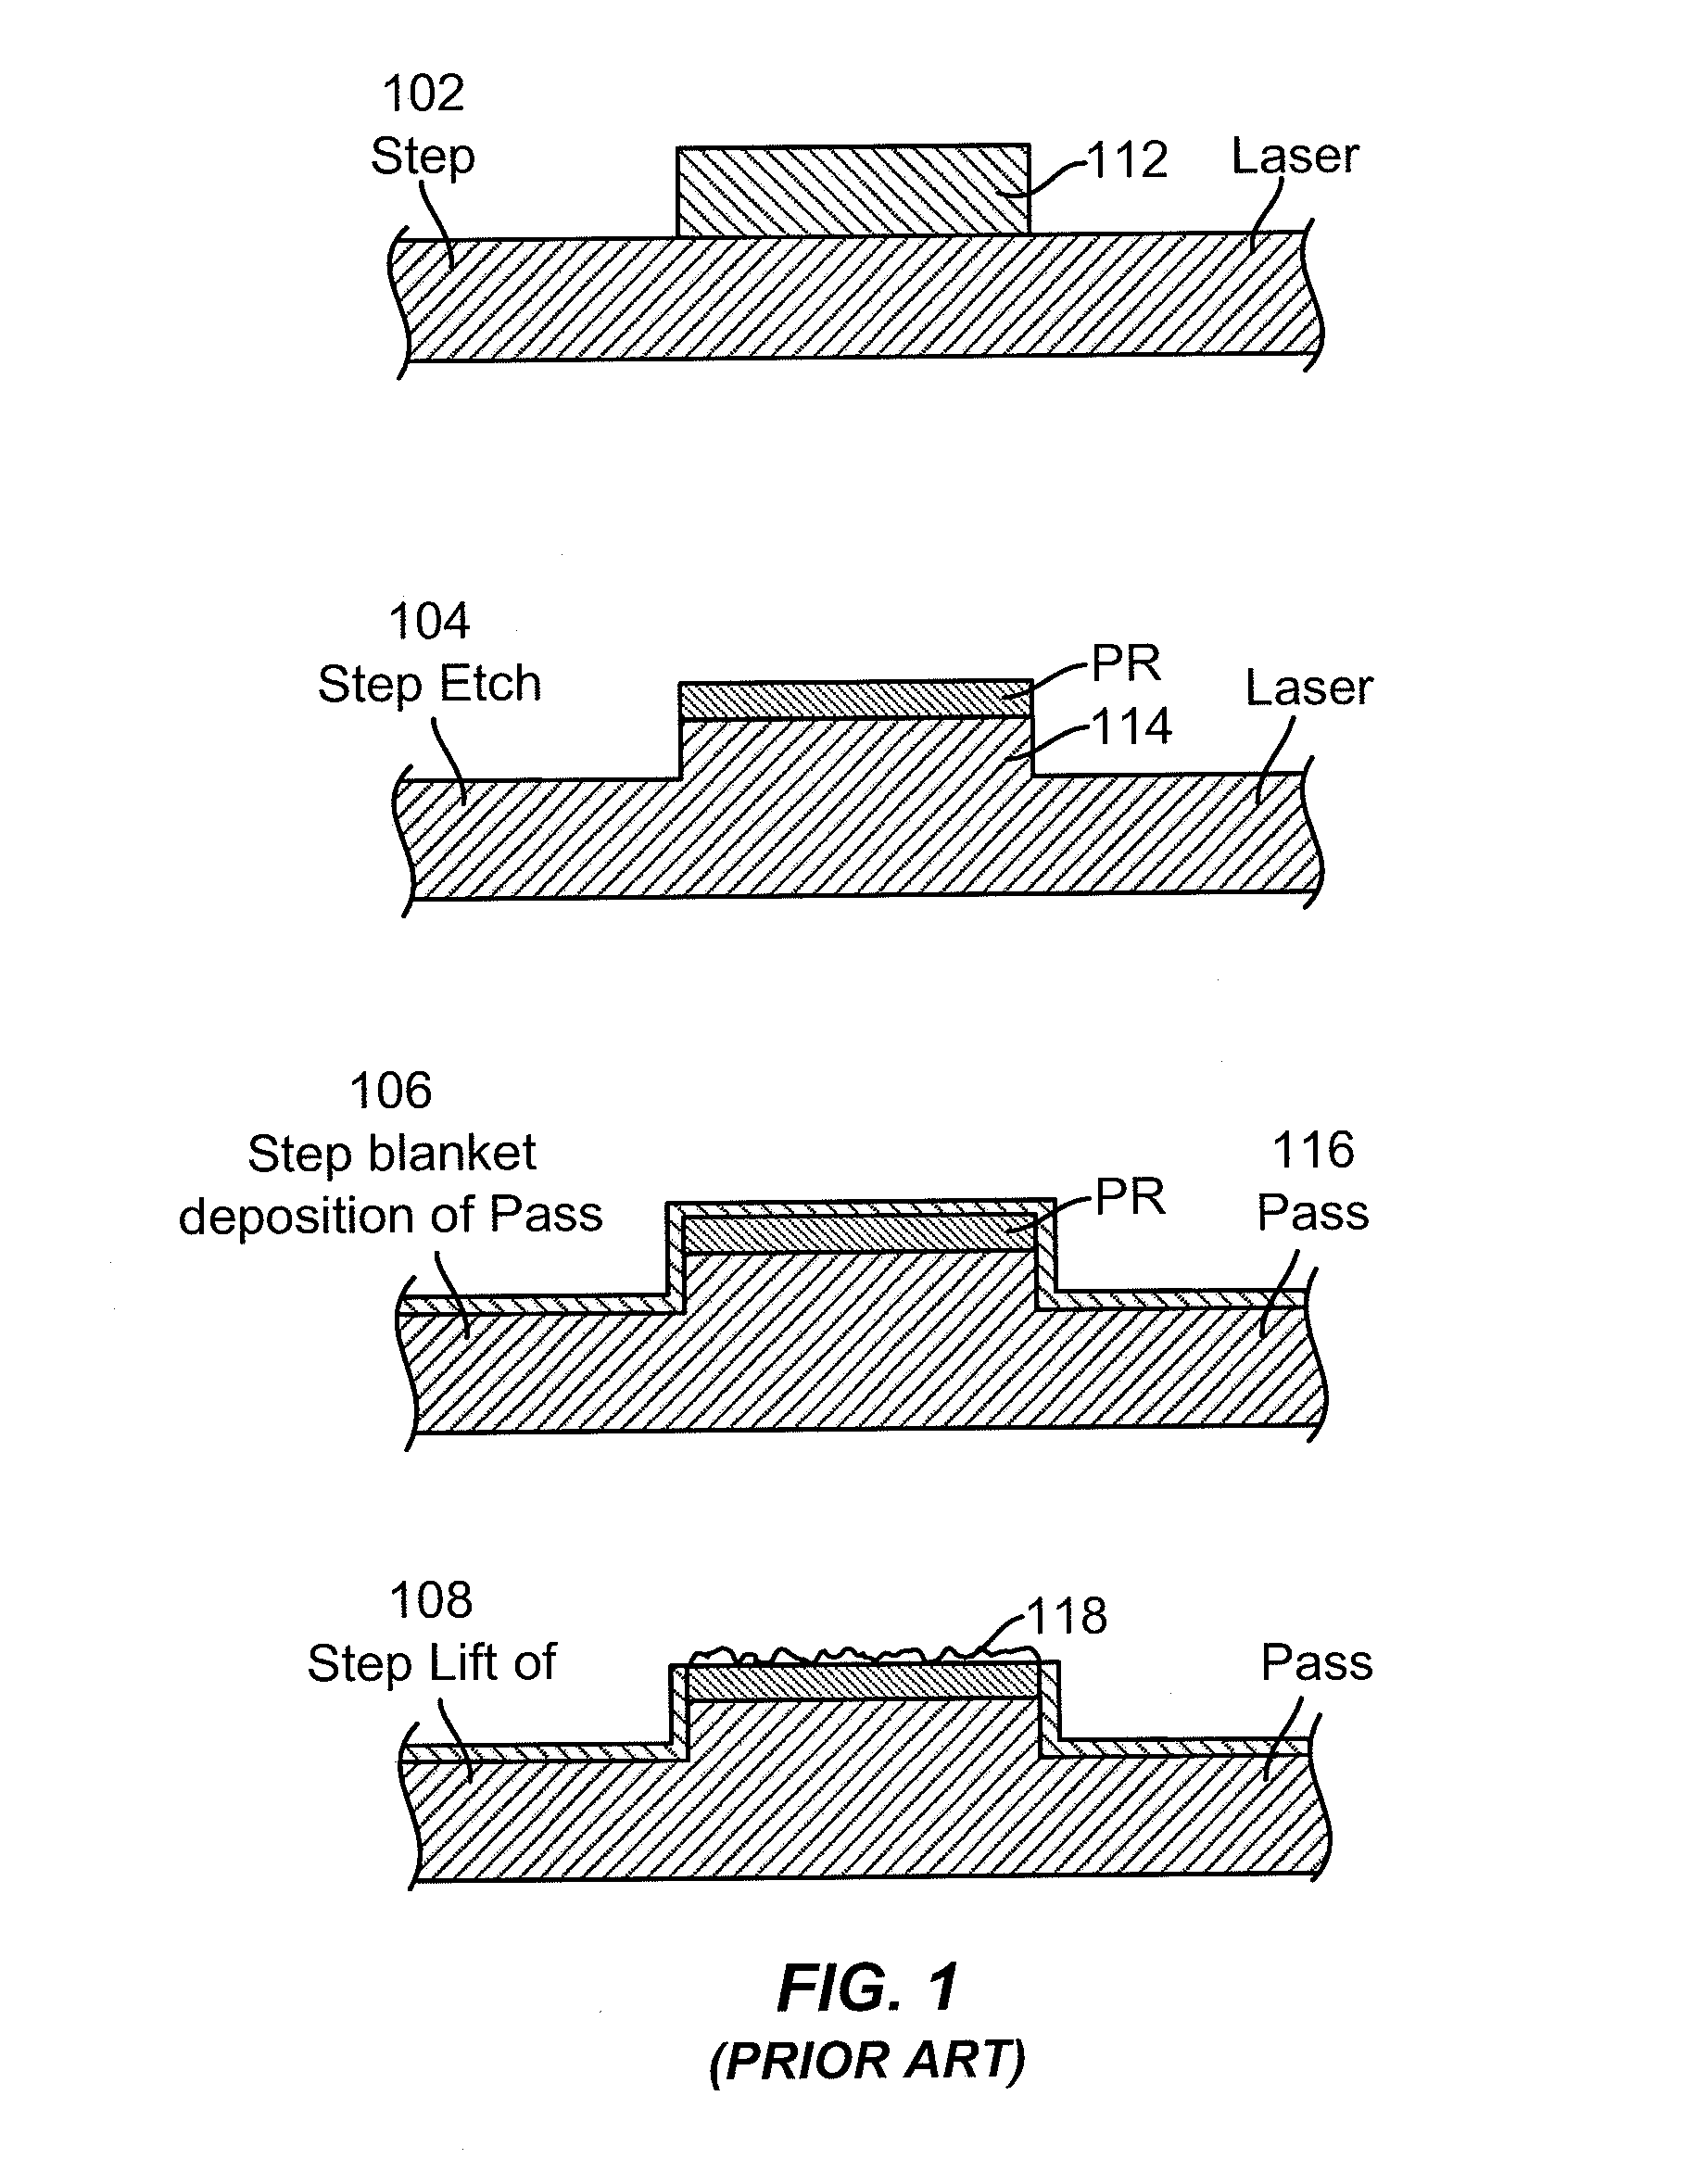 Self-aligned multi-dielectric-layer lift off process for laser diode stripes